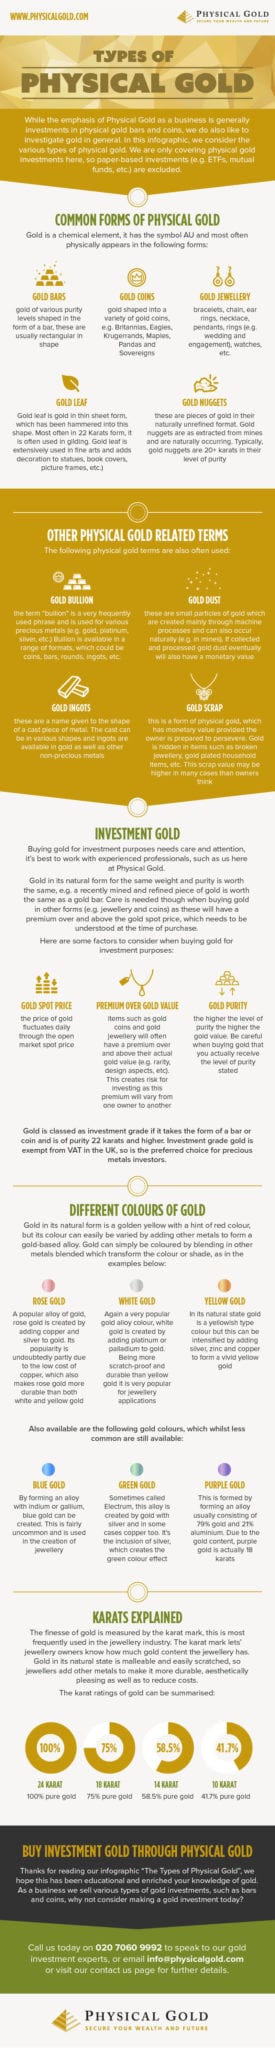 Types of gold